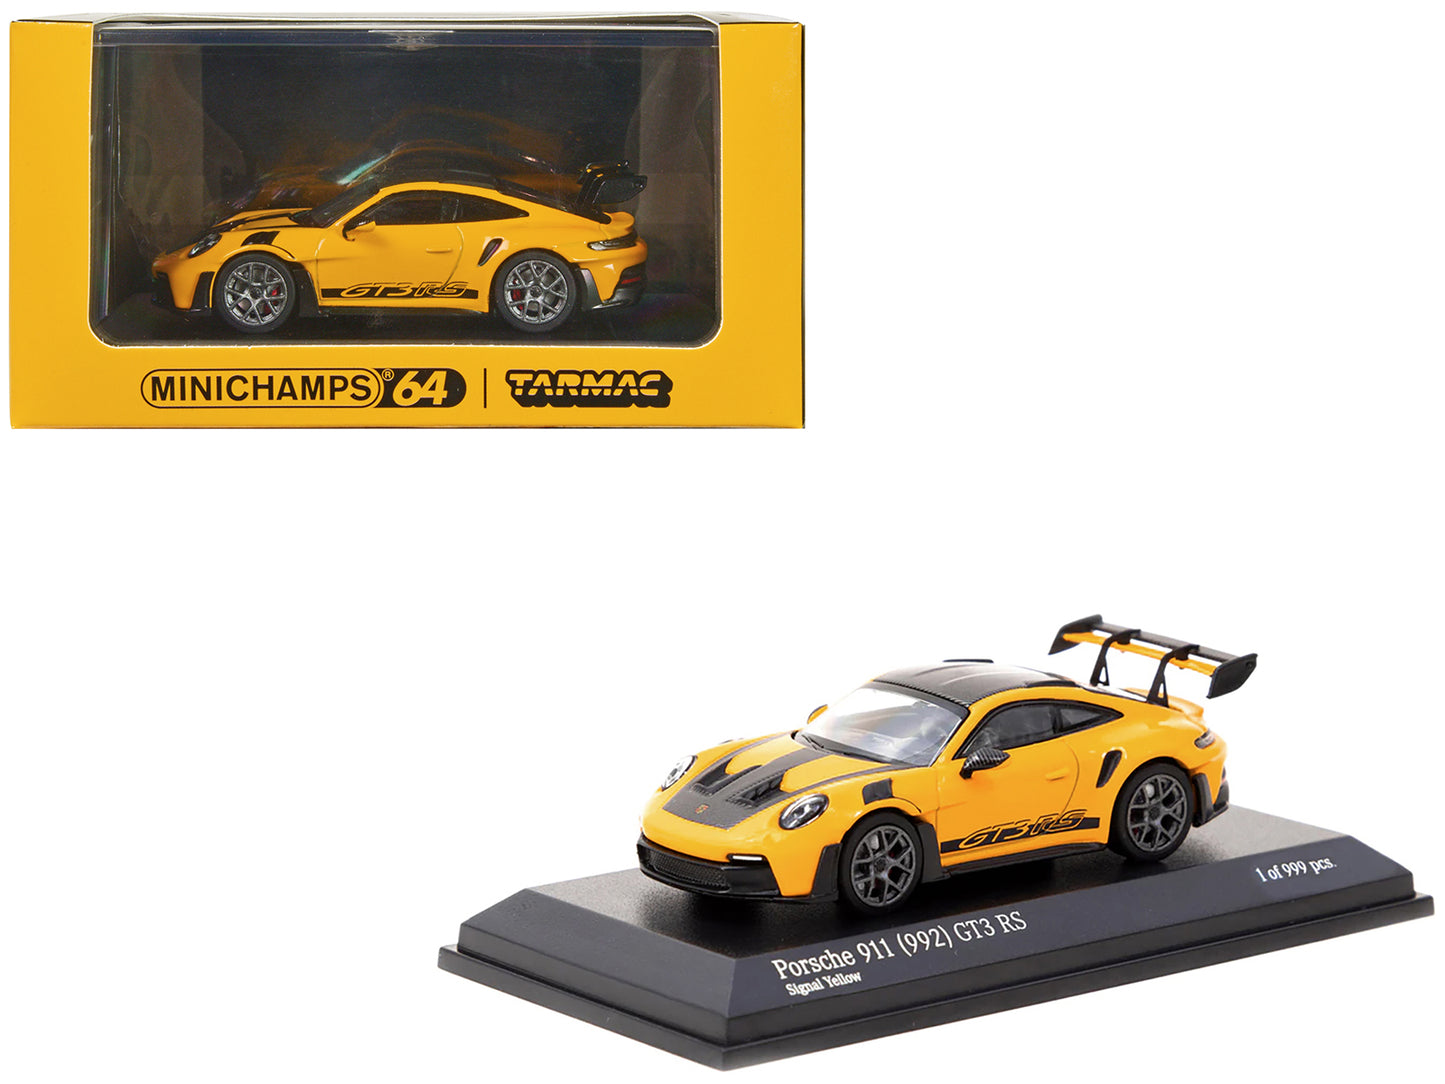 Porsche 911 (992) GT3 RS Signal Yellow with Black Stripes and Carbon Hood Limited Edition to 999 pieces Worldwide 1/64 Diecast Model Car by Minichamps & Tarmac Works